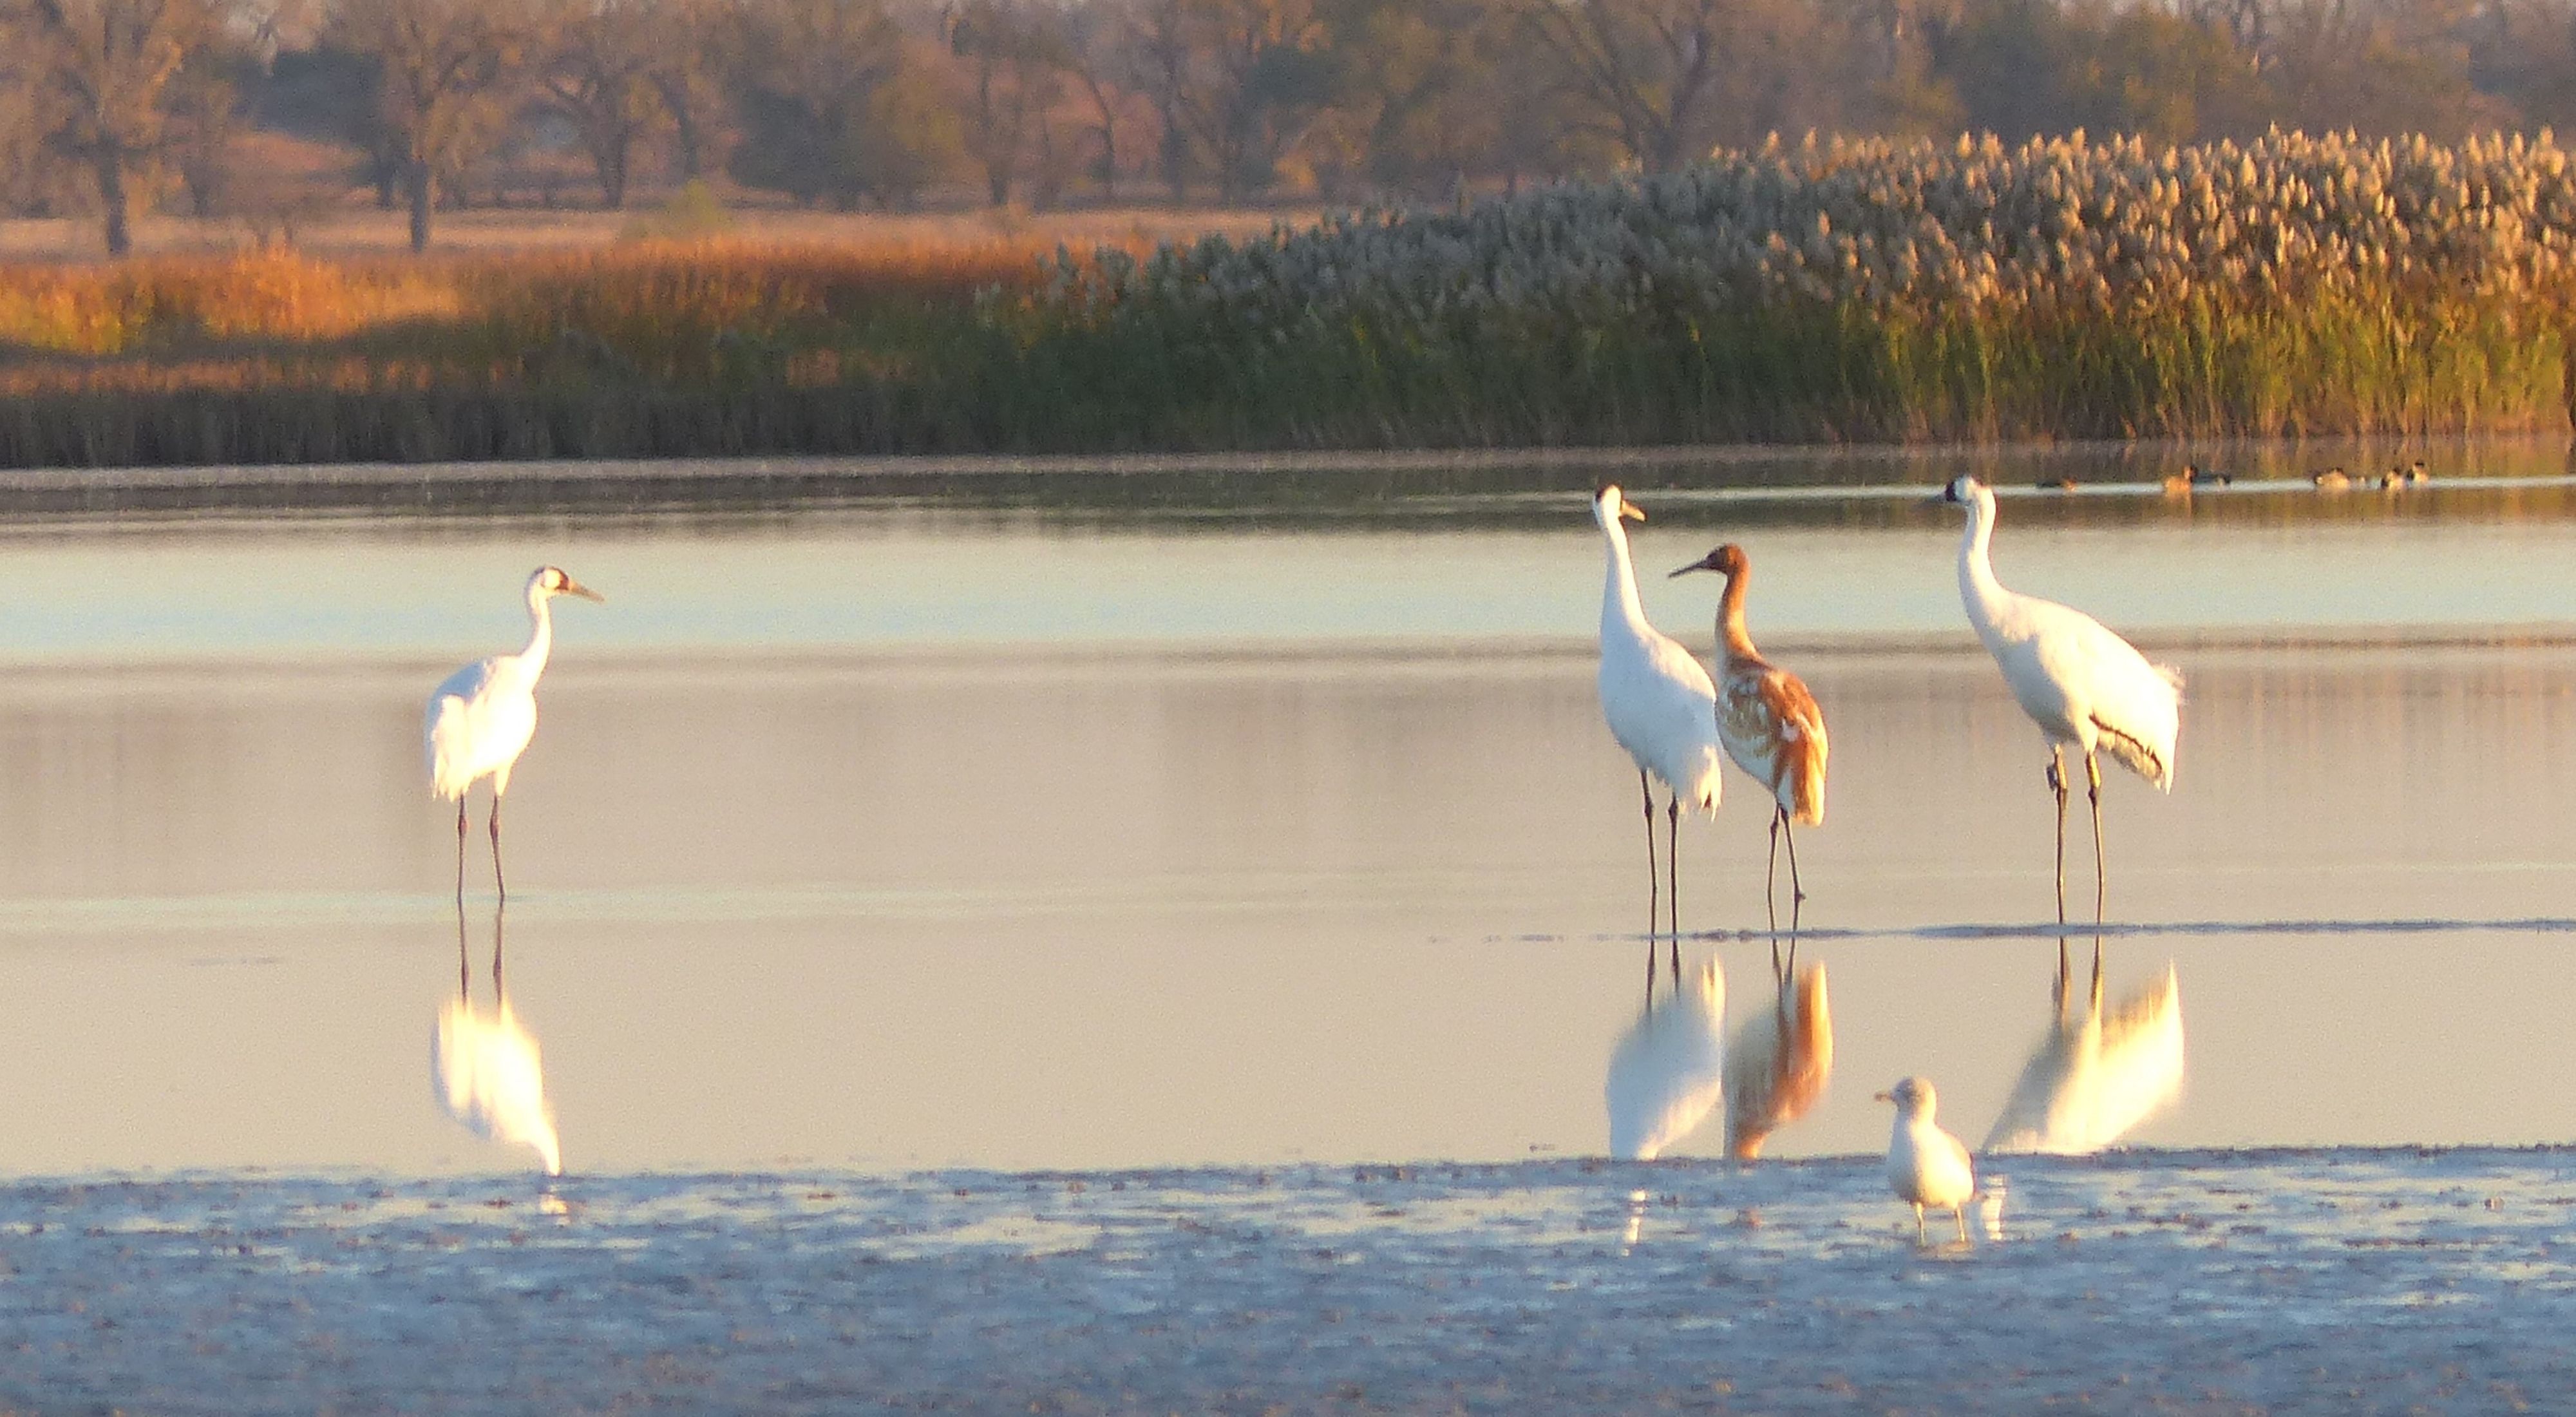 Three large white birds and one smaller brown and white bird standing in a shallow pool of water.